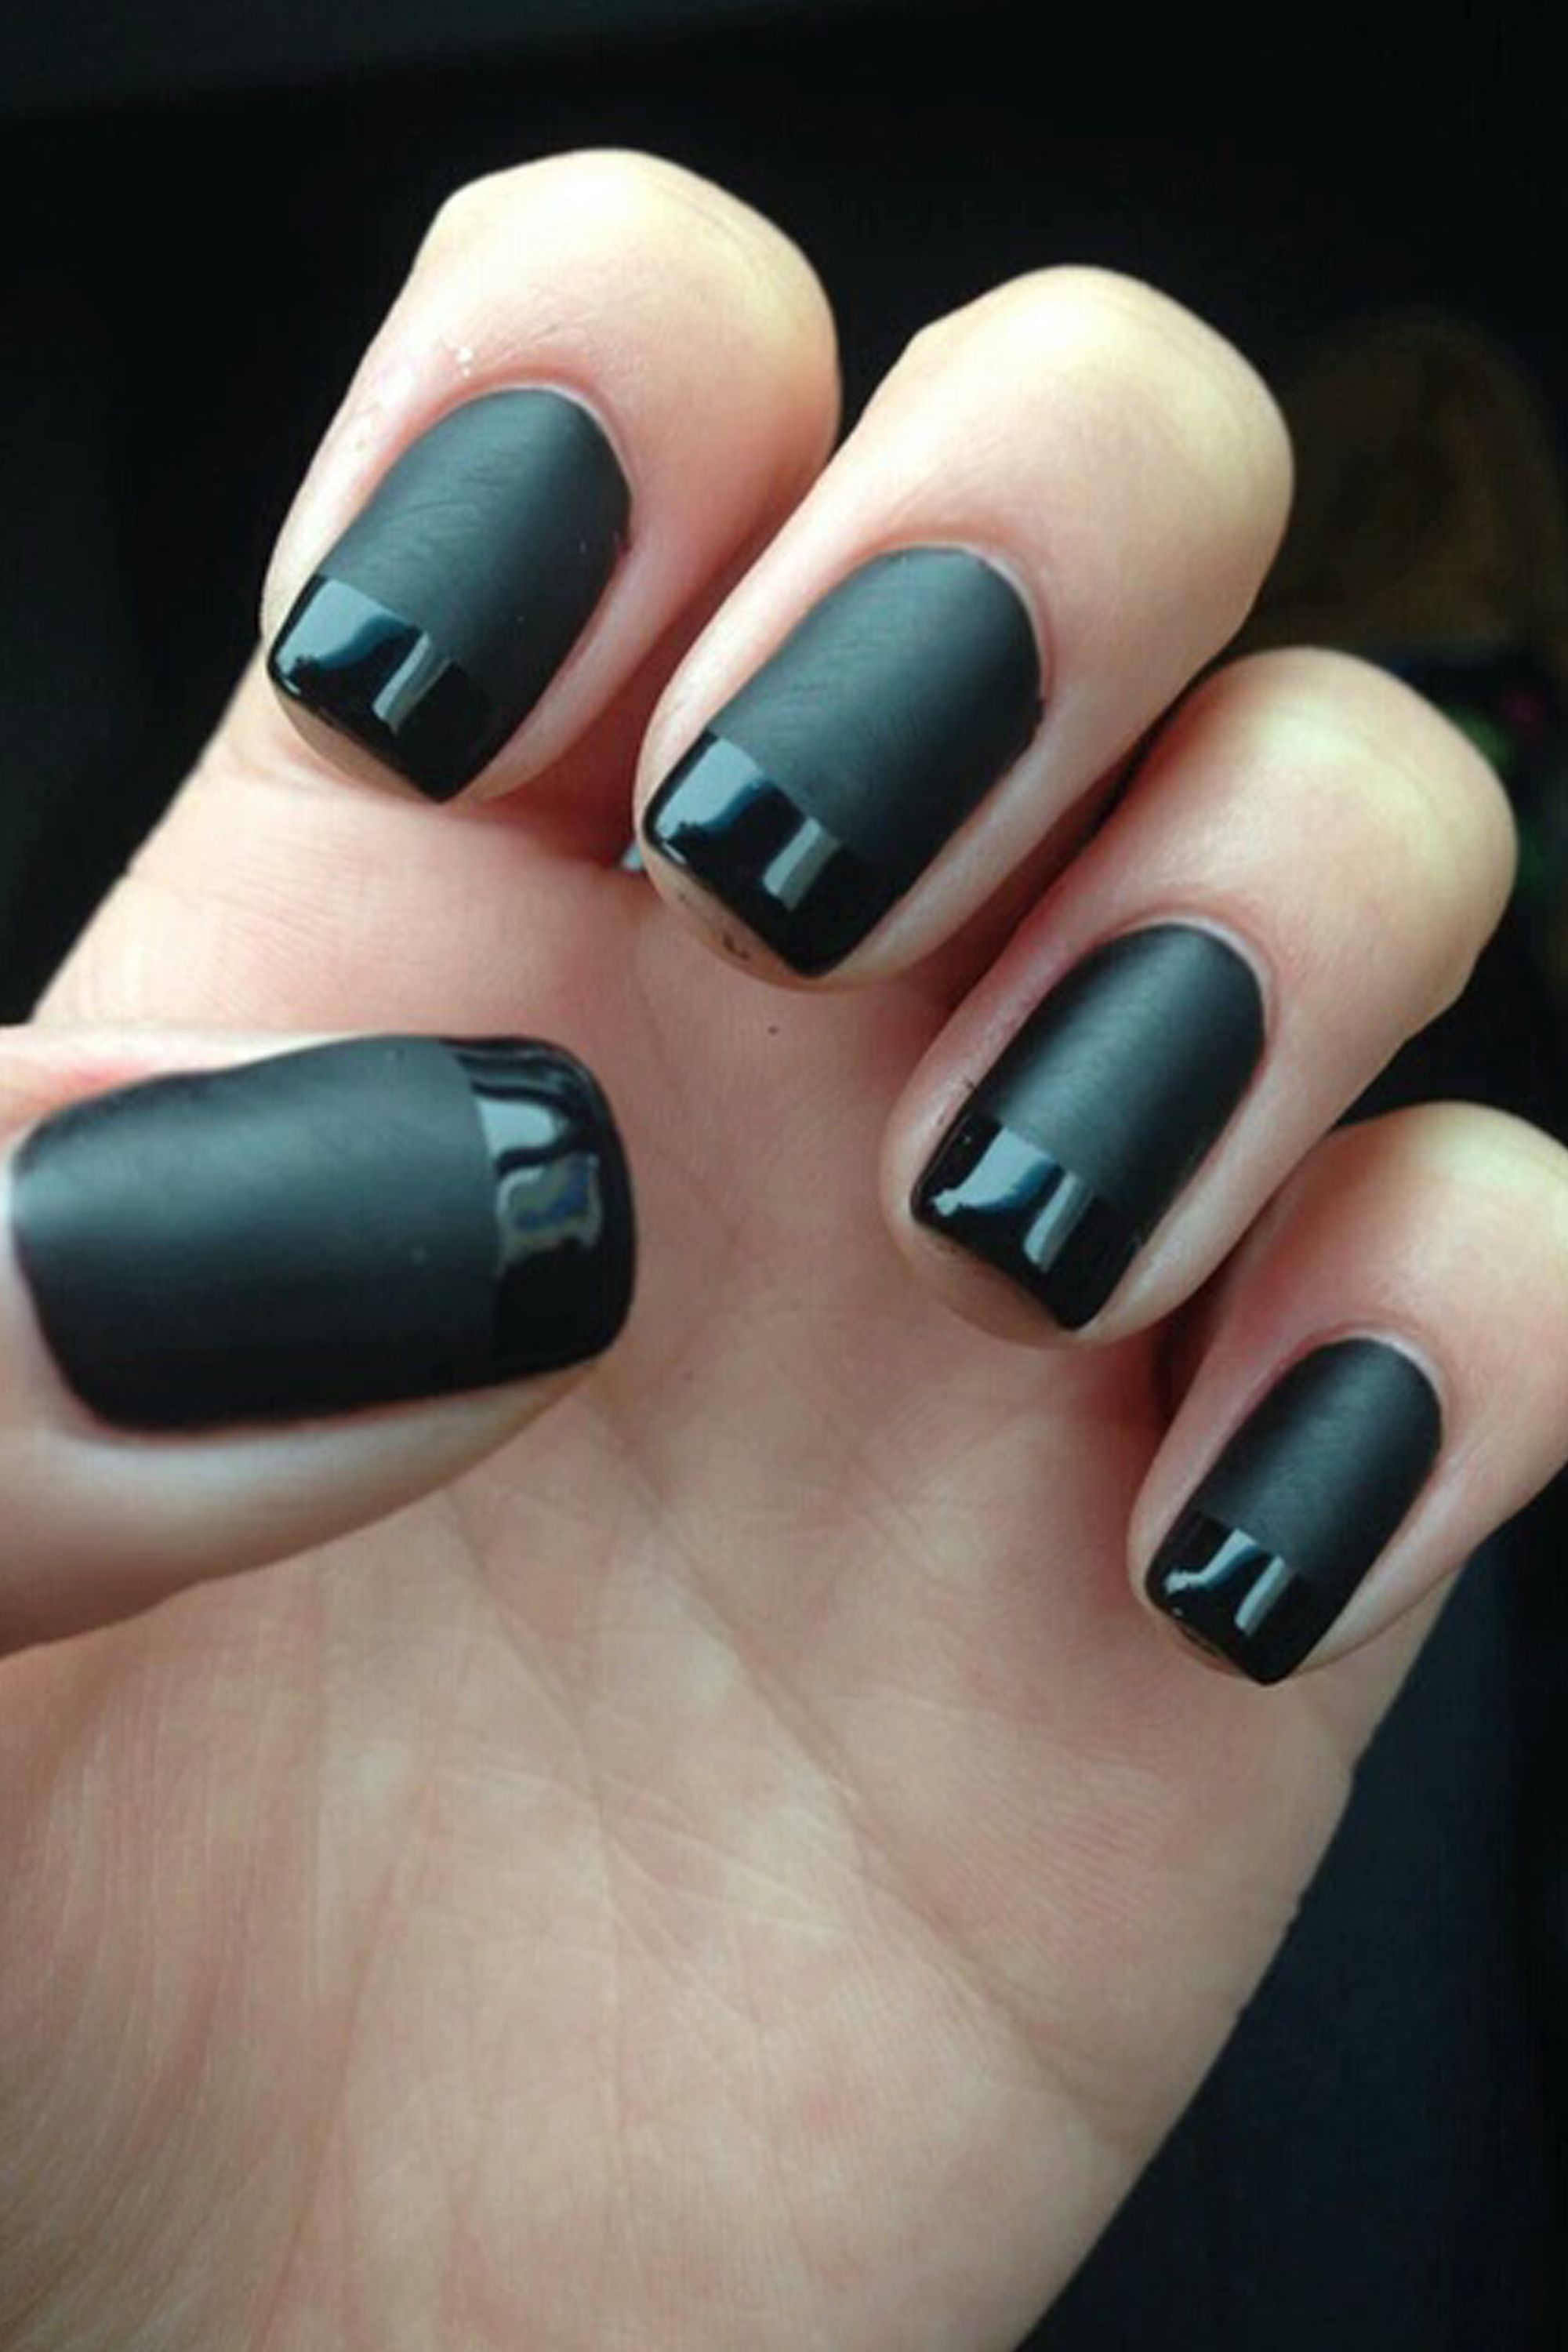 These Matte Summer Nail Designs Will Turn Heads